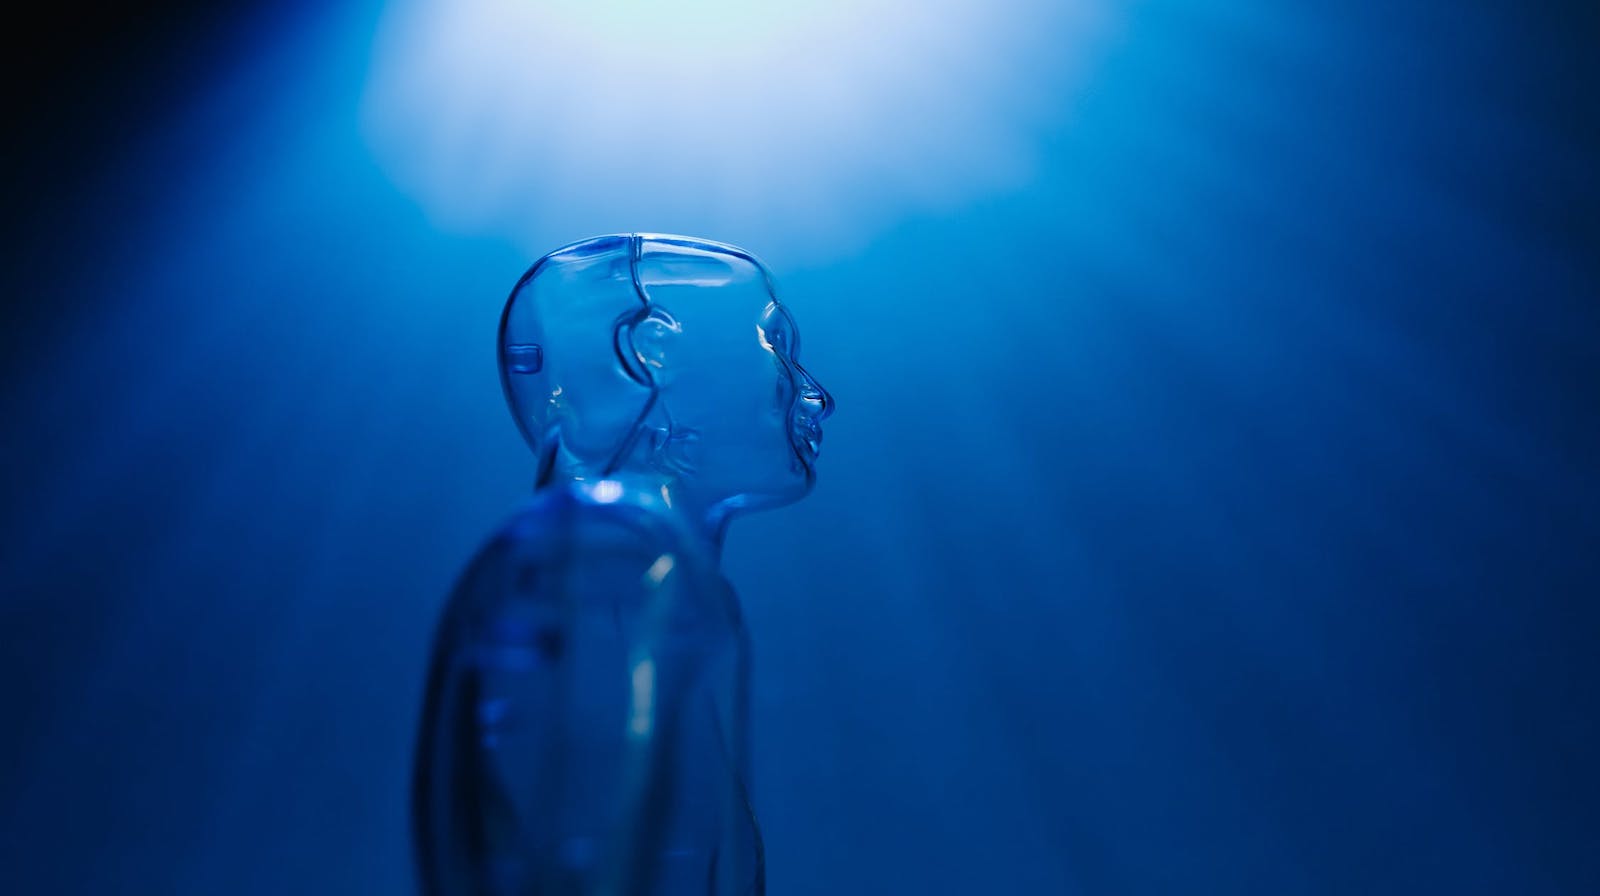 A clear mannequin against a dark blue background with light emanating from the top